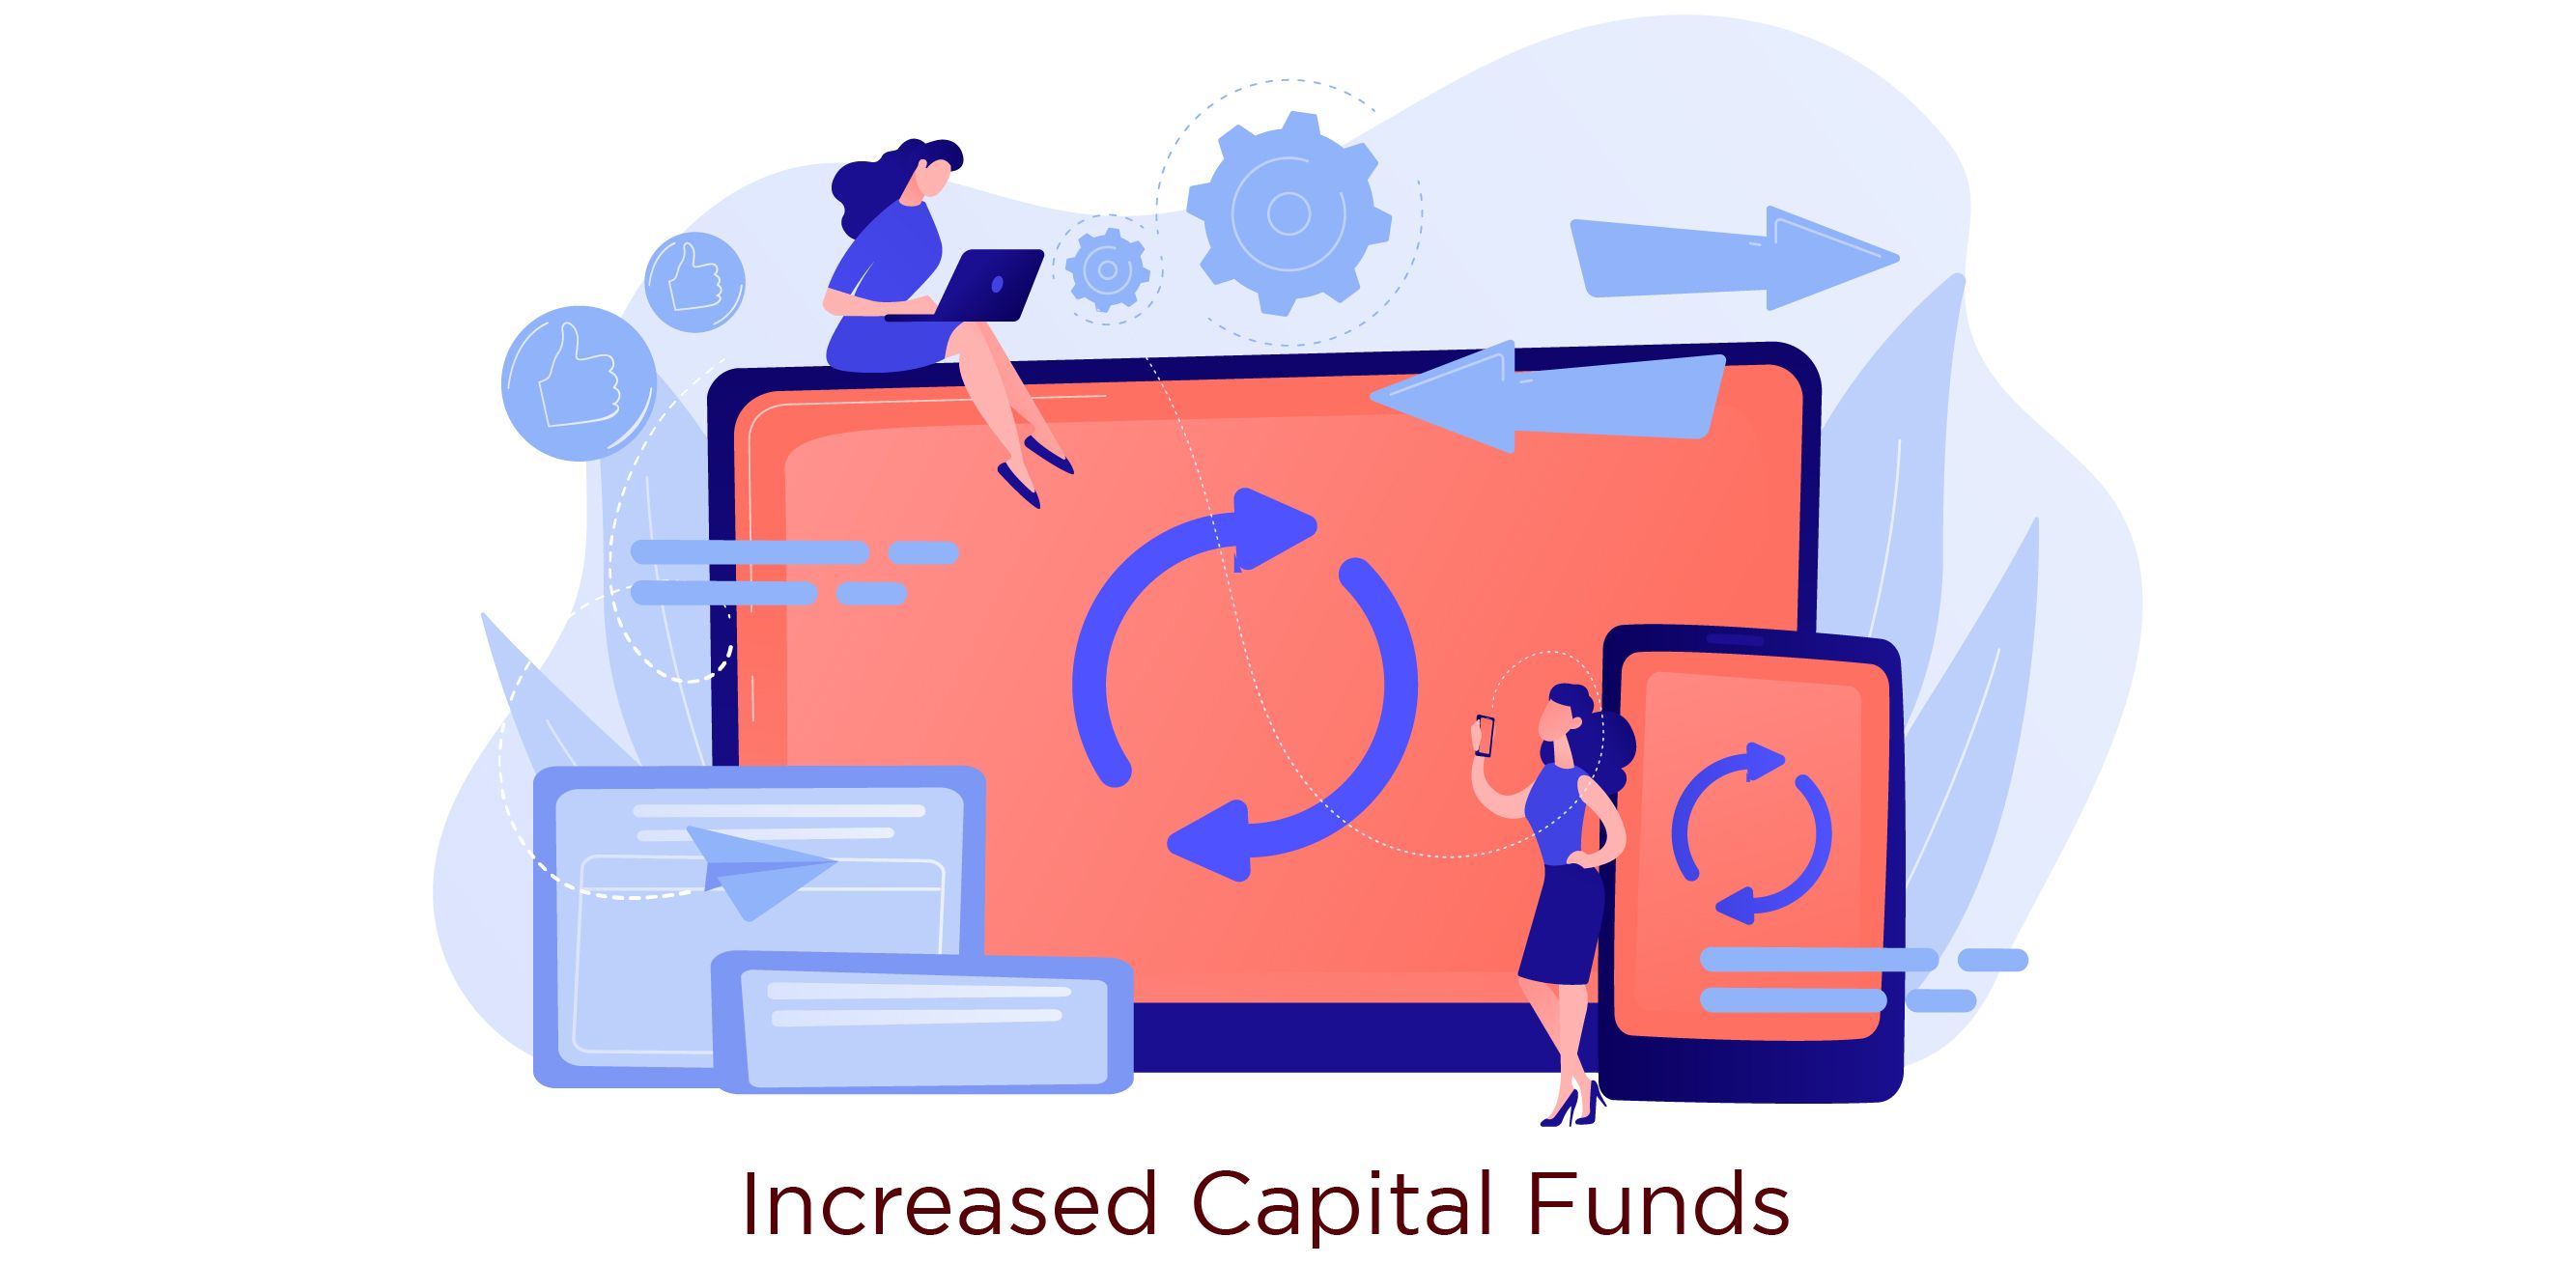  Increased Capital Funds